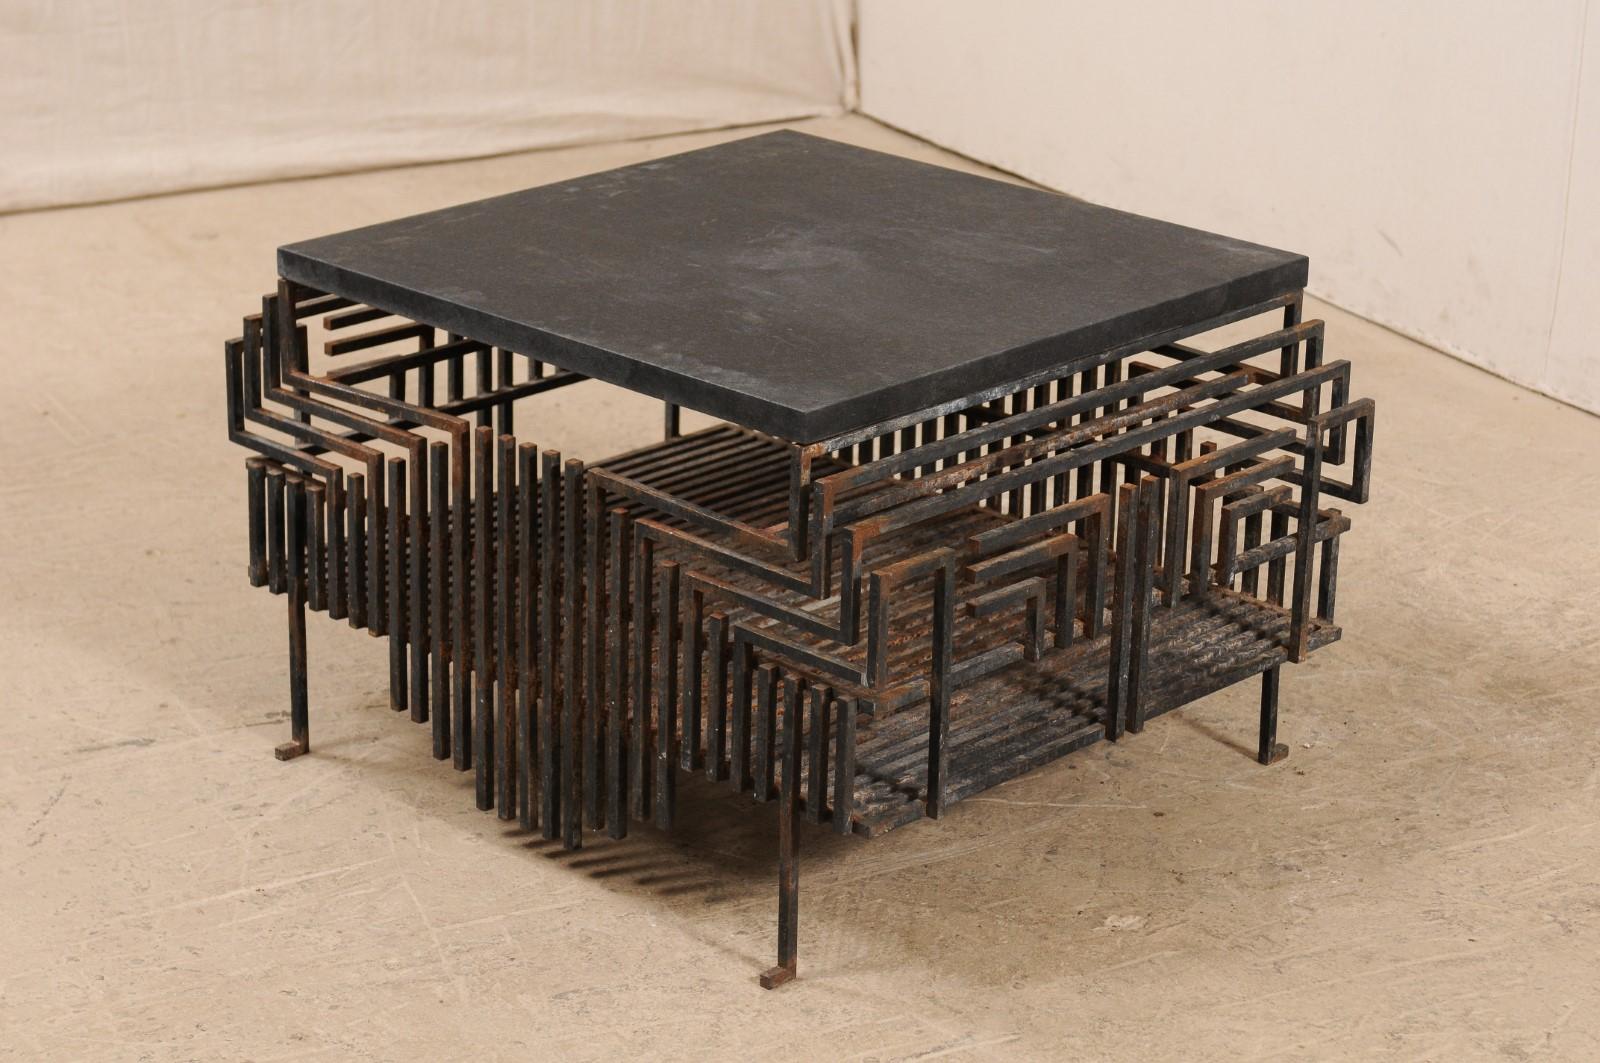 Modern French, Early 20th Century Iron Fireplace Grate Coffee Table with Granite Top